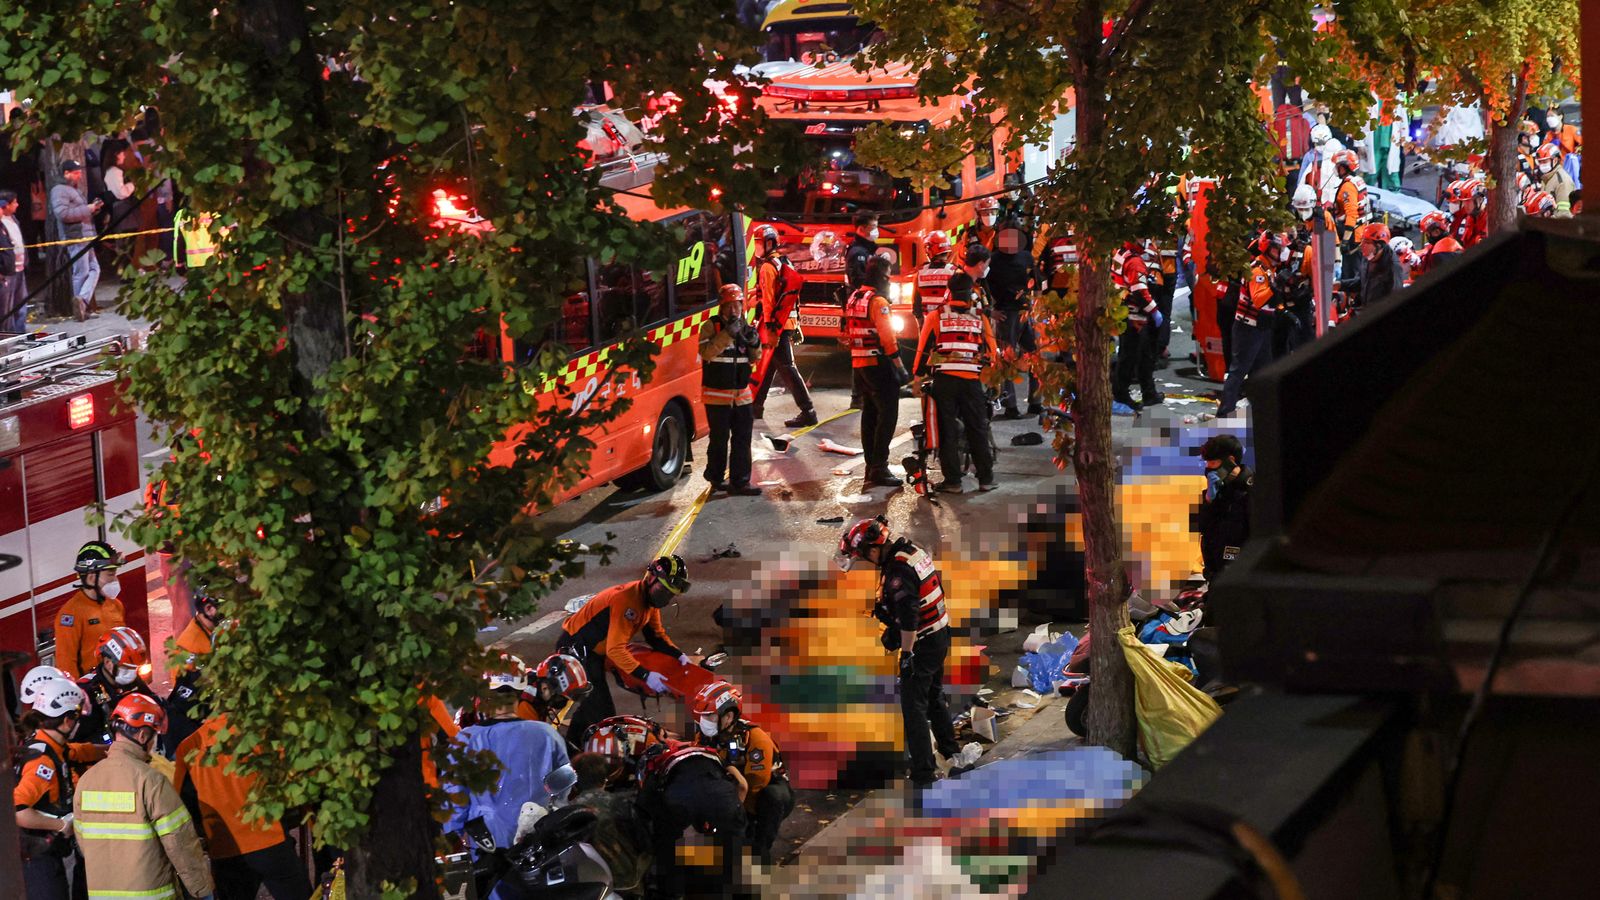 At least 59 dead and 150 injured after stampede during Halloween festivities in Itaewon, South Korea